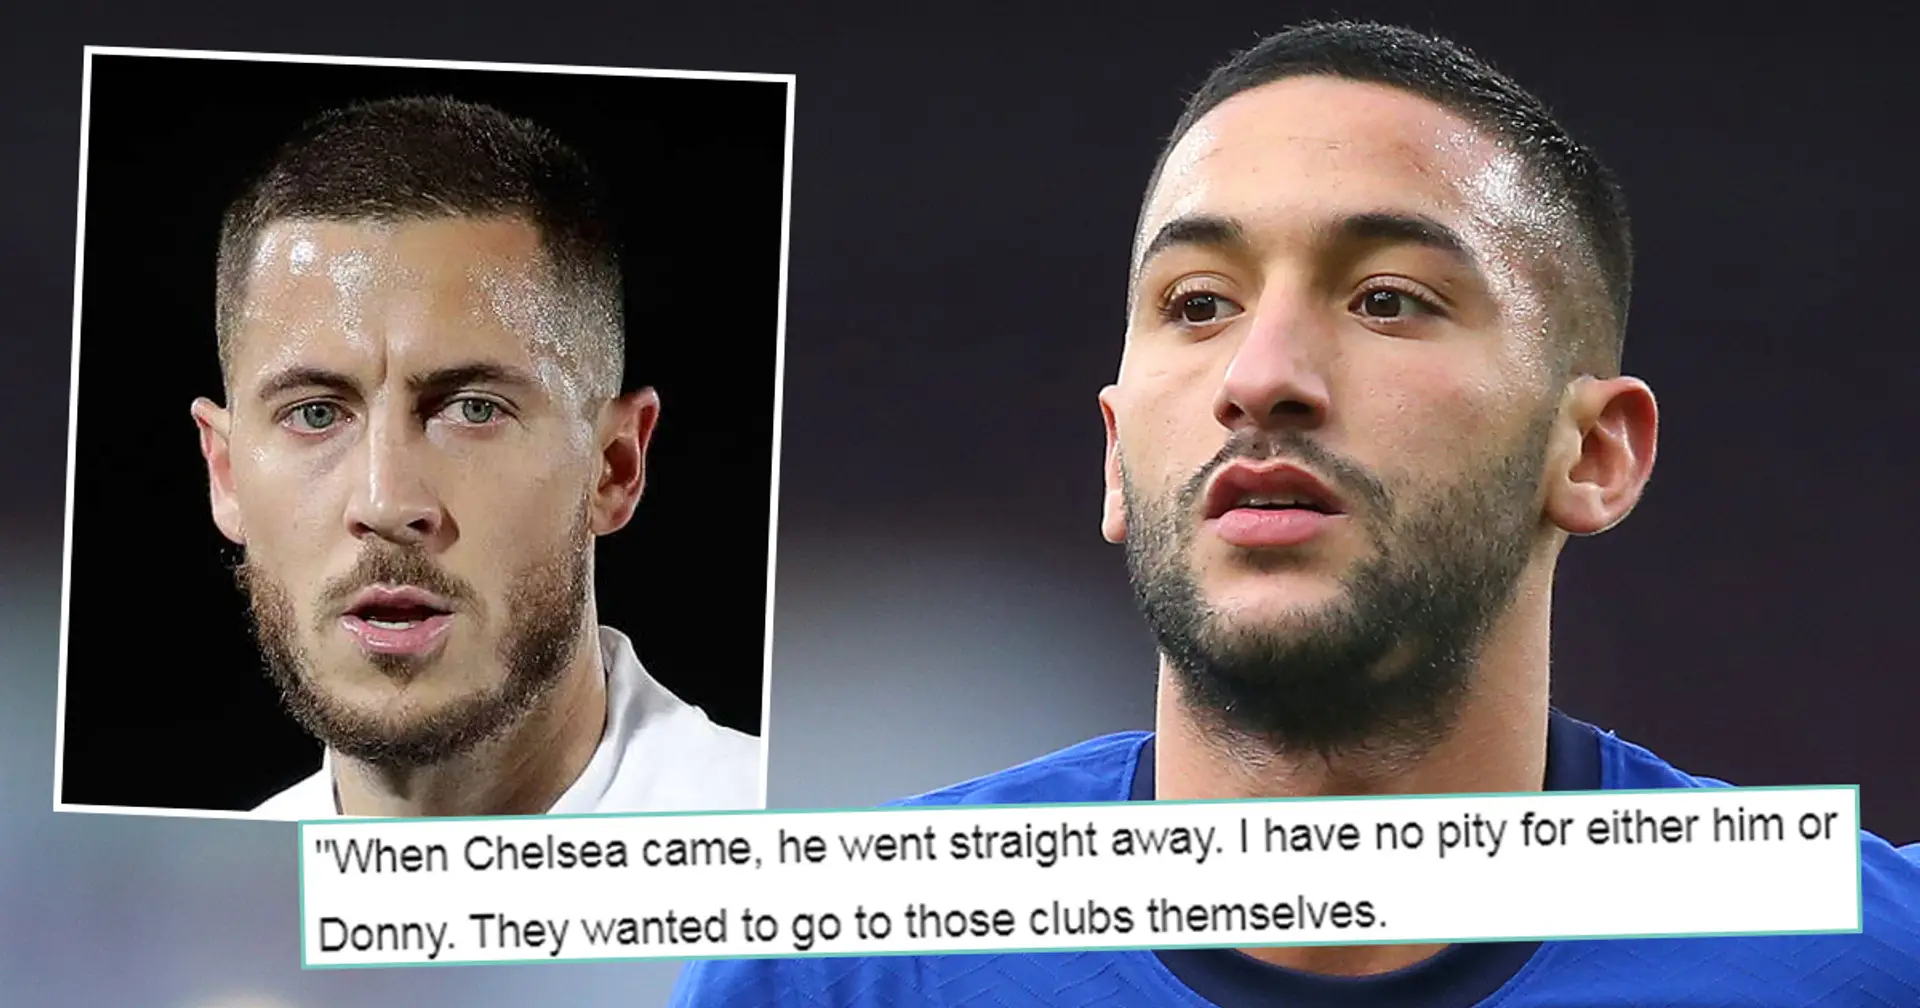 'If he played for Real, he'd have been better than Hazard': Ajax fans discuss Ziyech's career at Chelsea so far